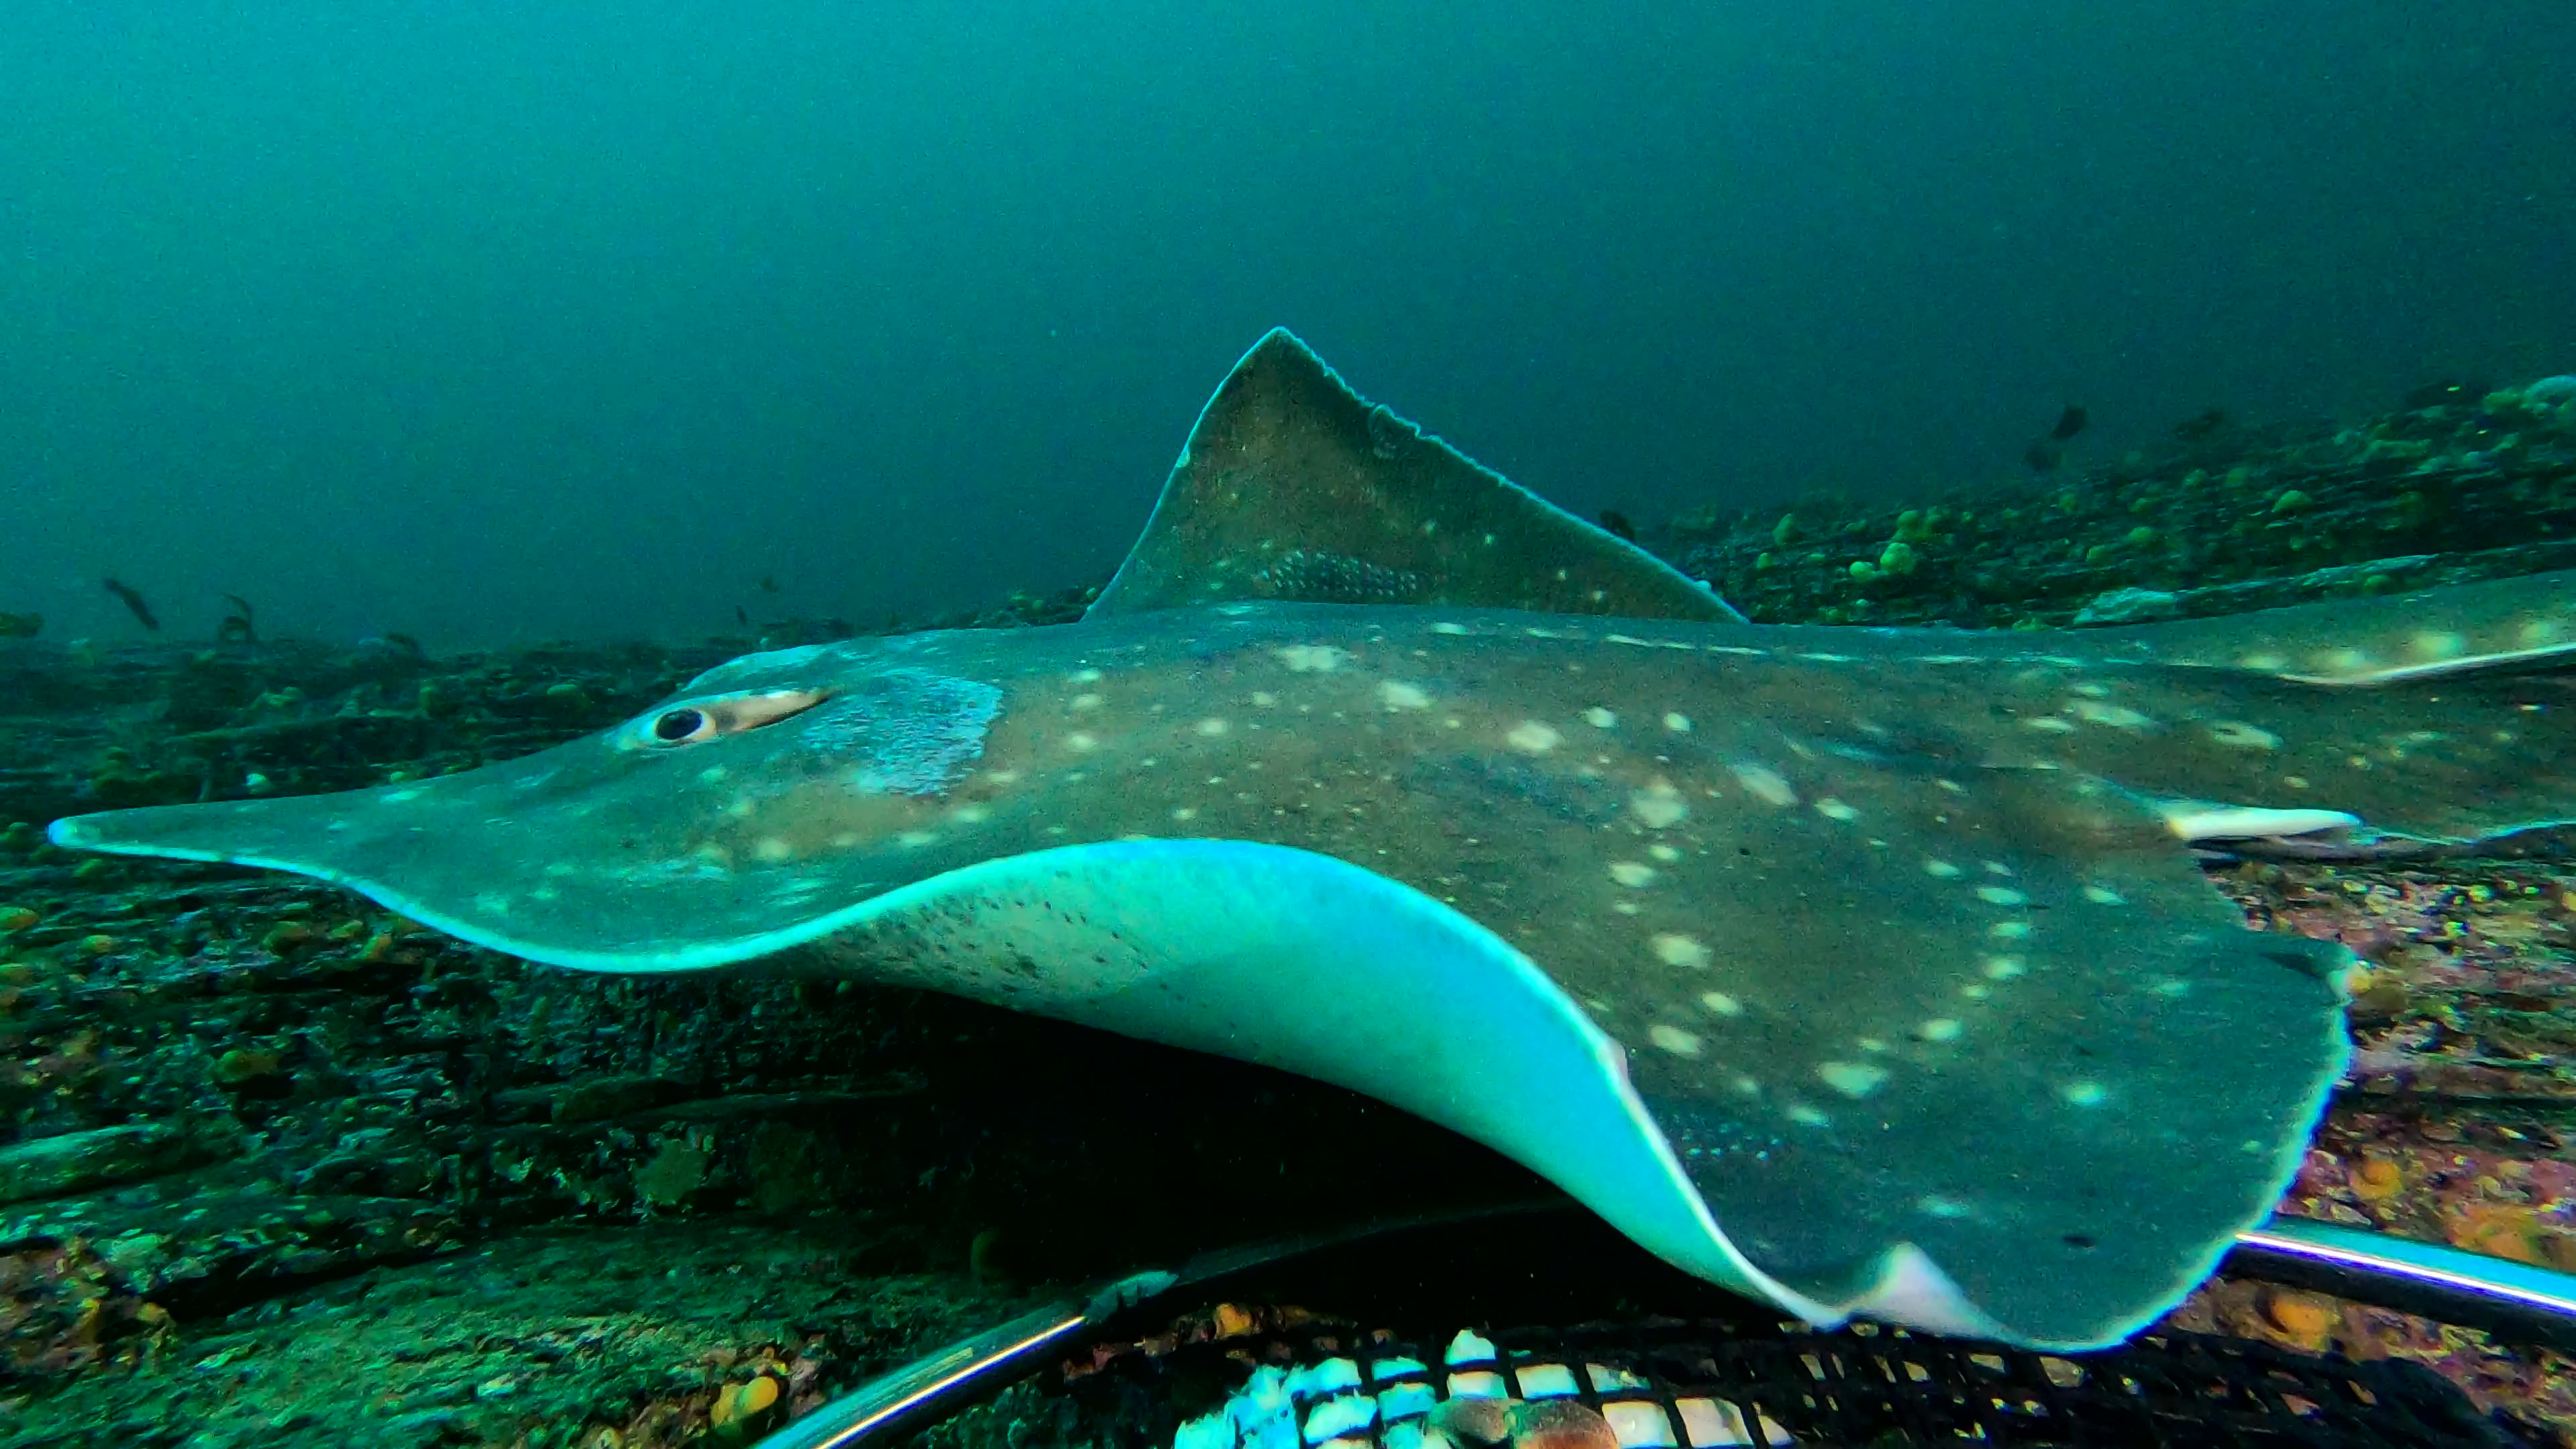 2. Flapper skate can reach up to 2.5m fully grown